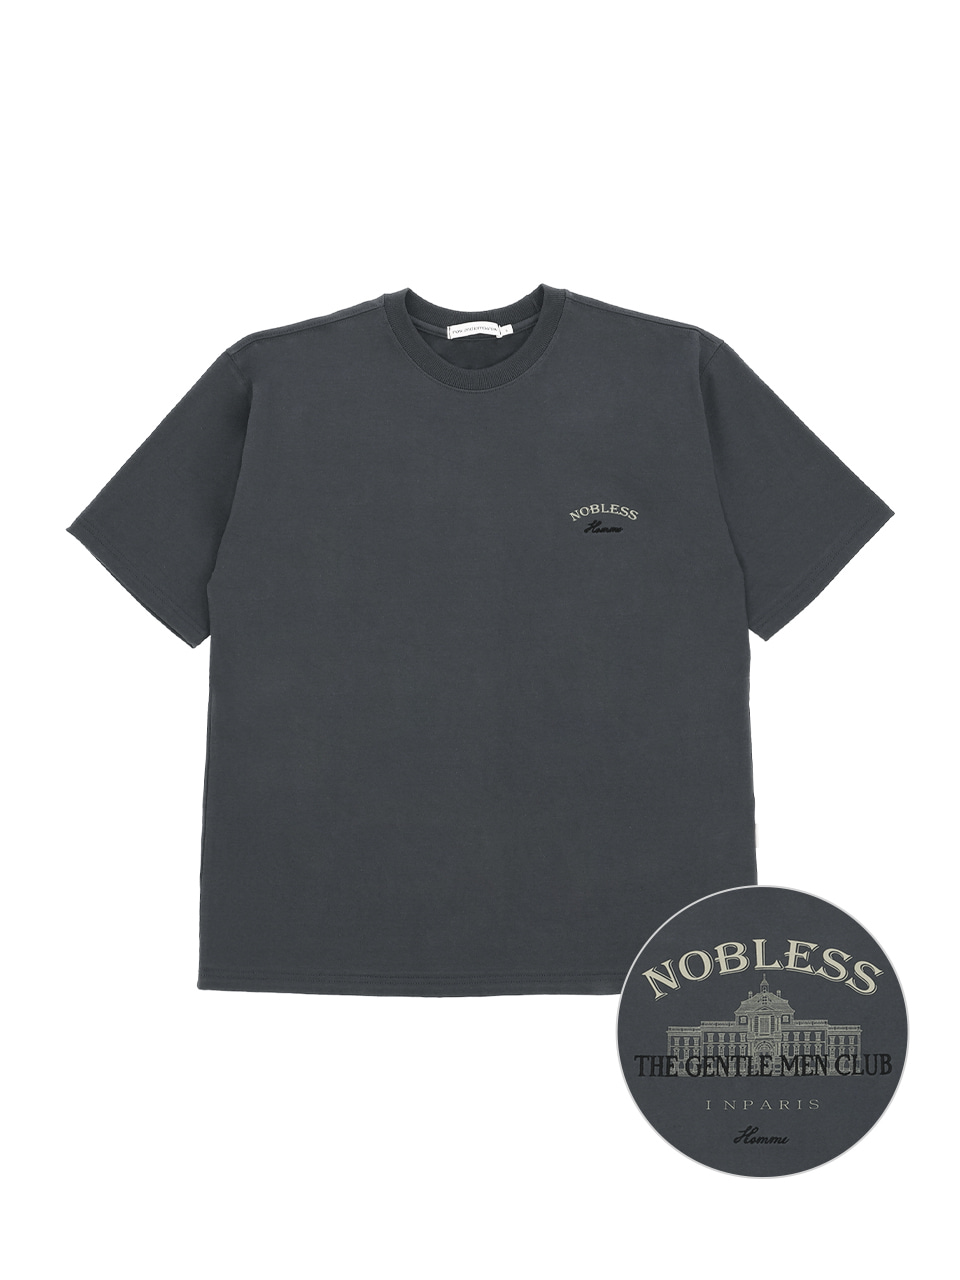 NOBLESS T-SHIRTS [CHARCOAL]